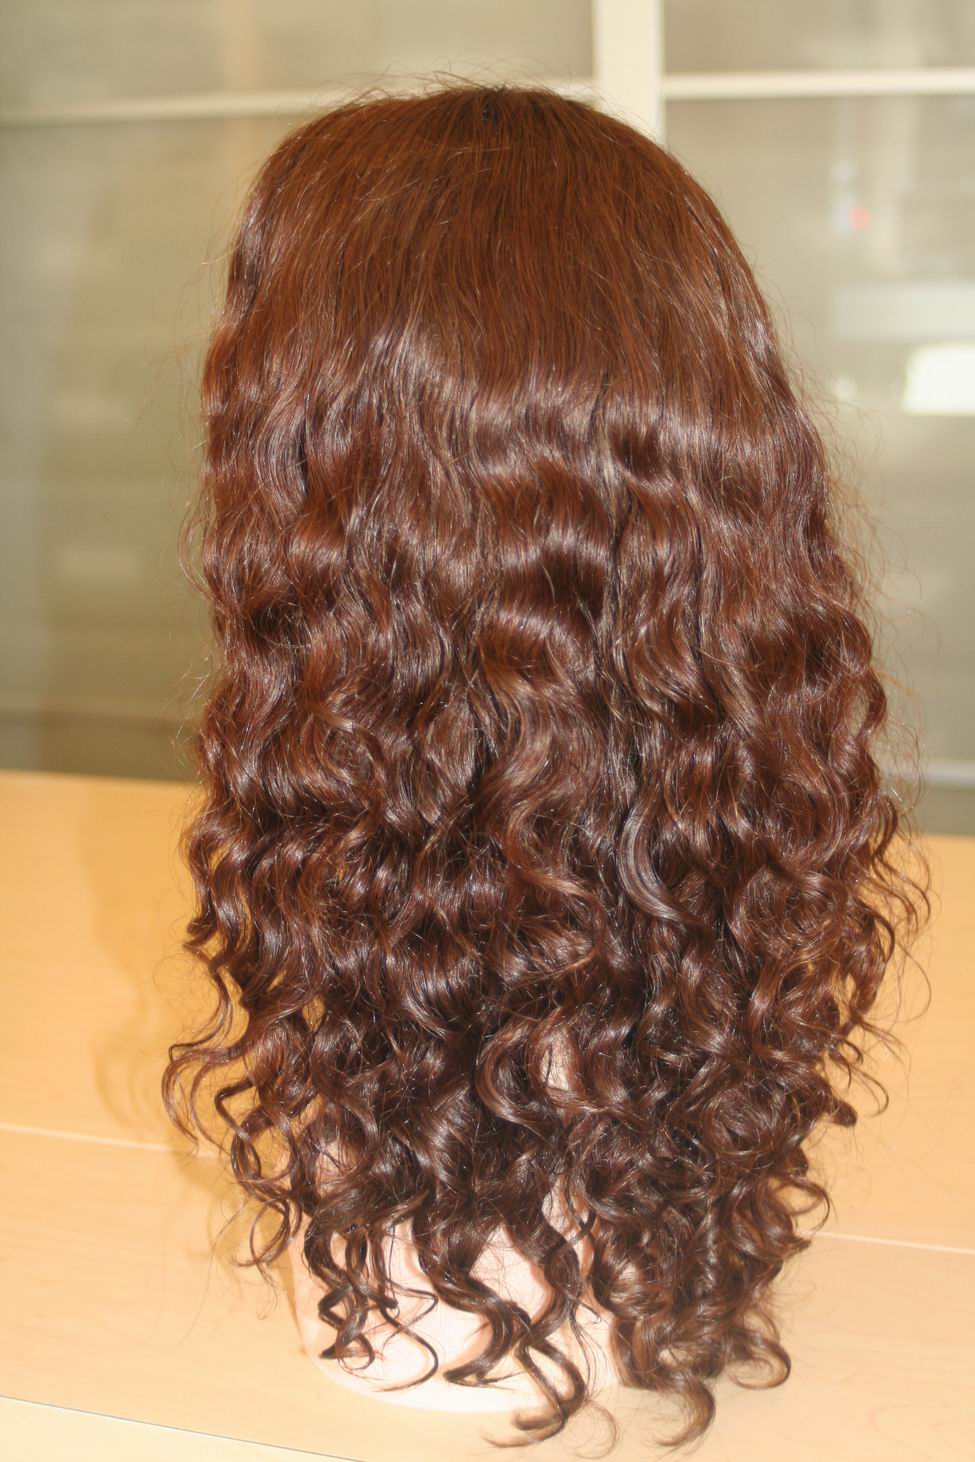 lace fronts, full lace wigs, lace front wigs